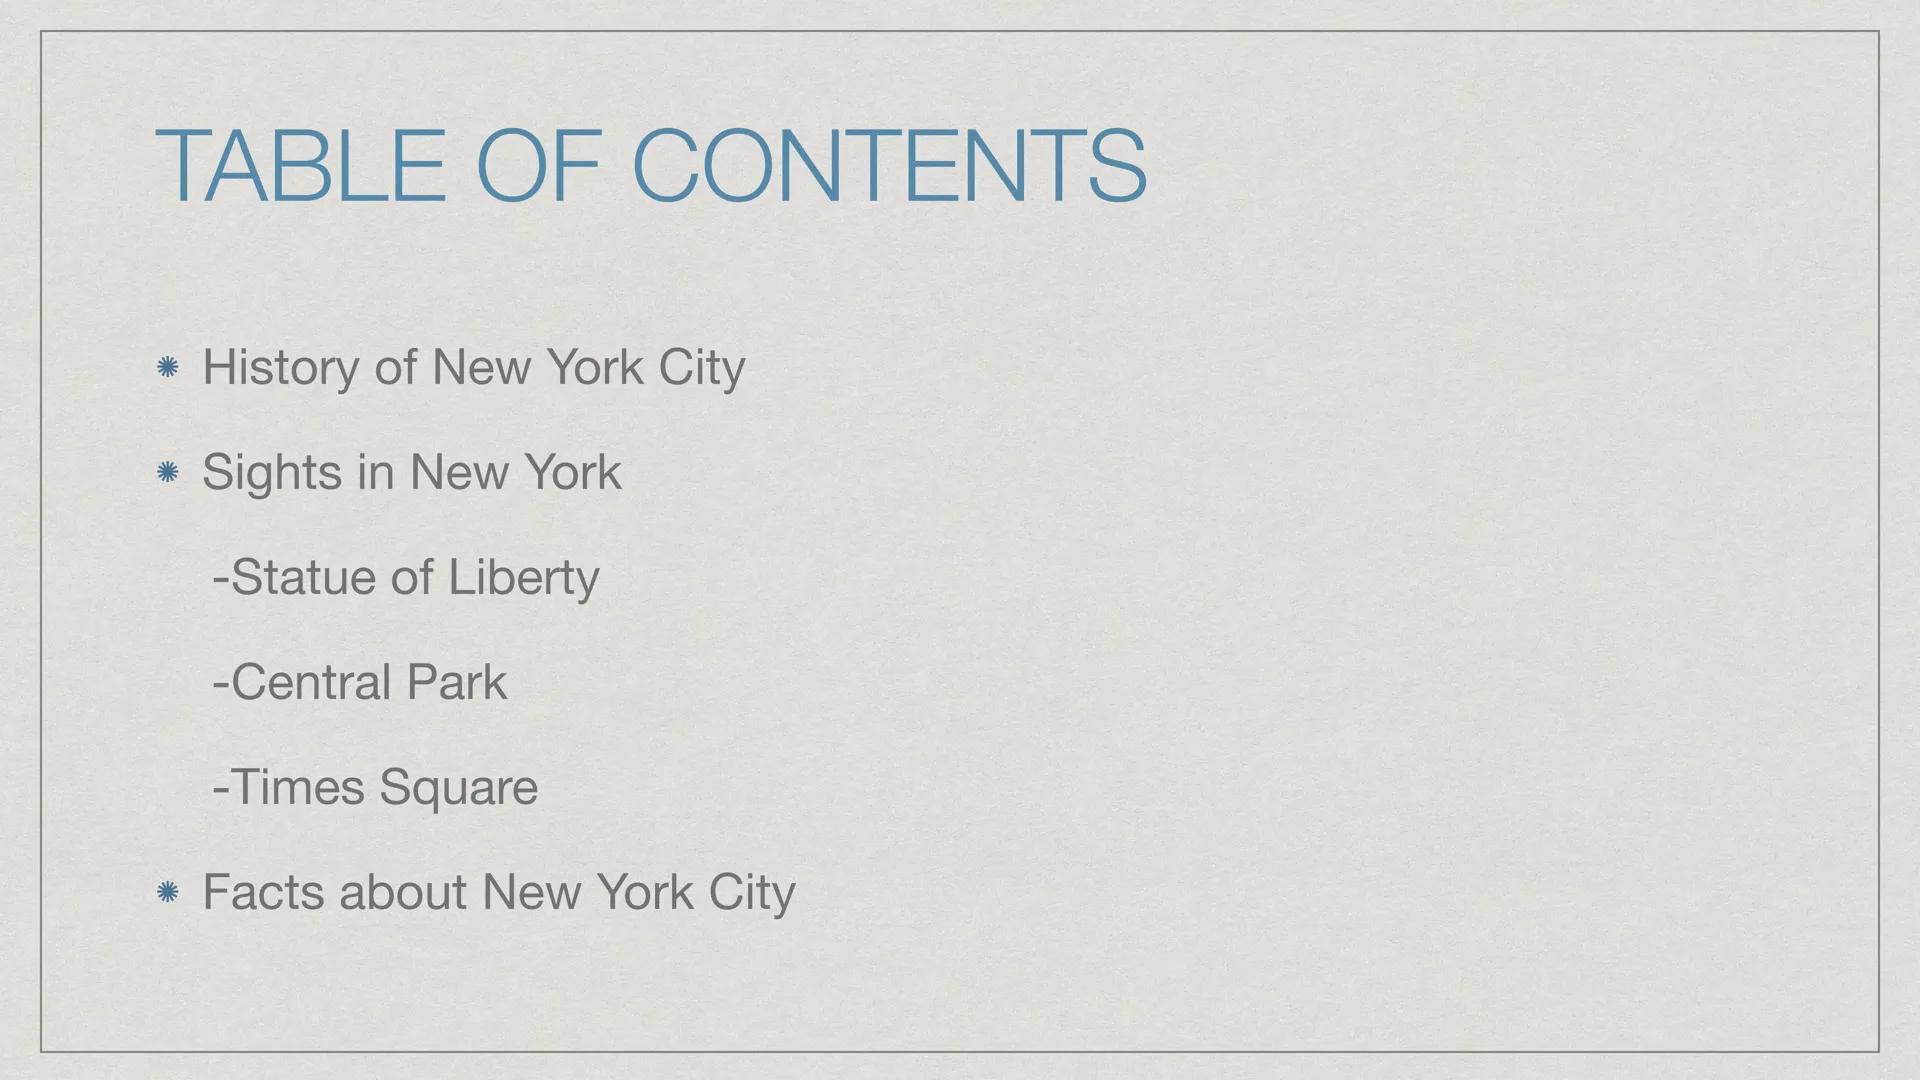 FROM NATALIA GOIA
NEW YORK
ET VIREN
COME
AWAY
SAMSU
MEAN TABLE OF CONTENTS
History of New York City
* Sights in New York
-Statue of Liberty
